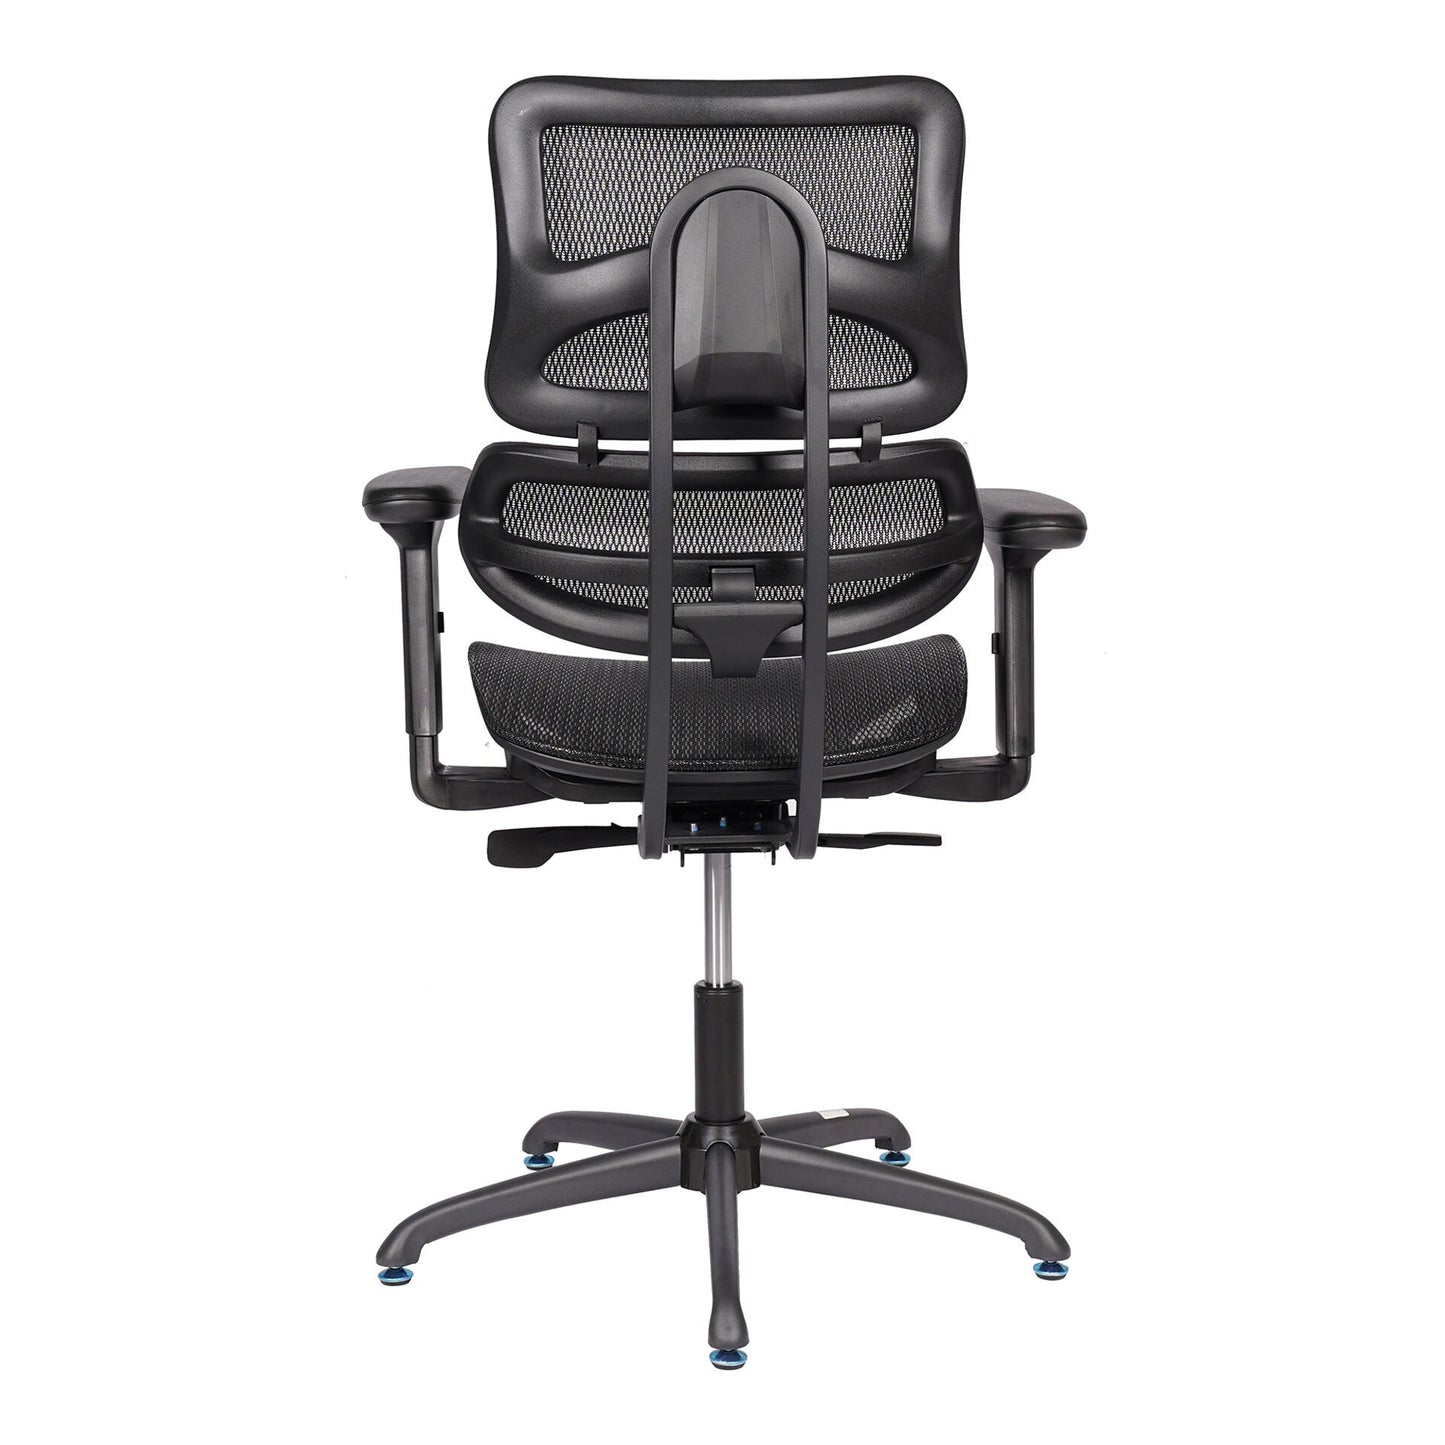 Huimei Medicated Visitor Chair, Black, CMB-137B-4 - COOLBABY